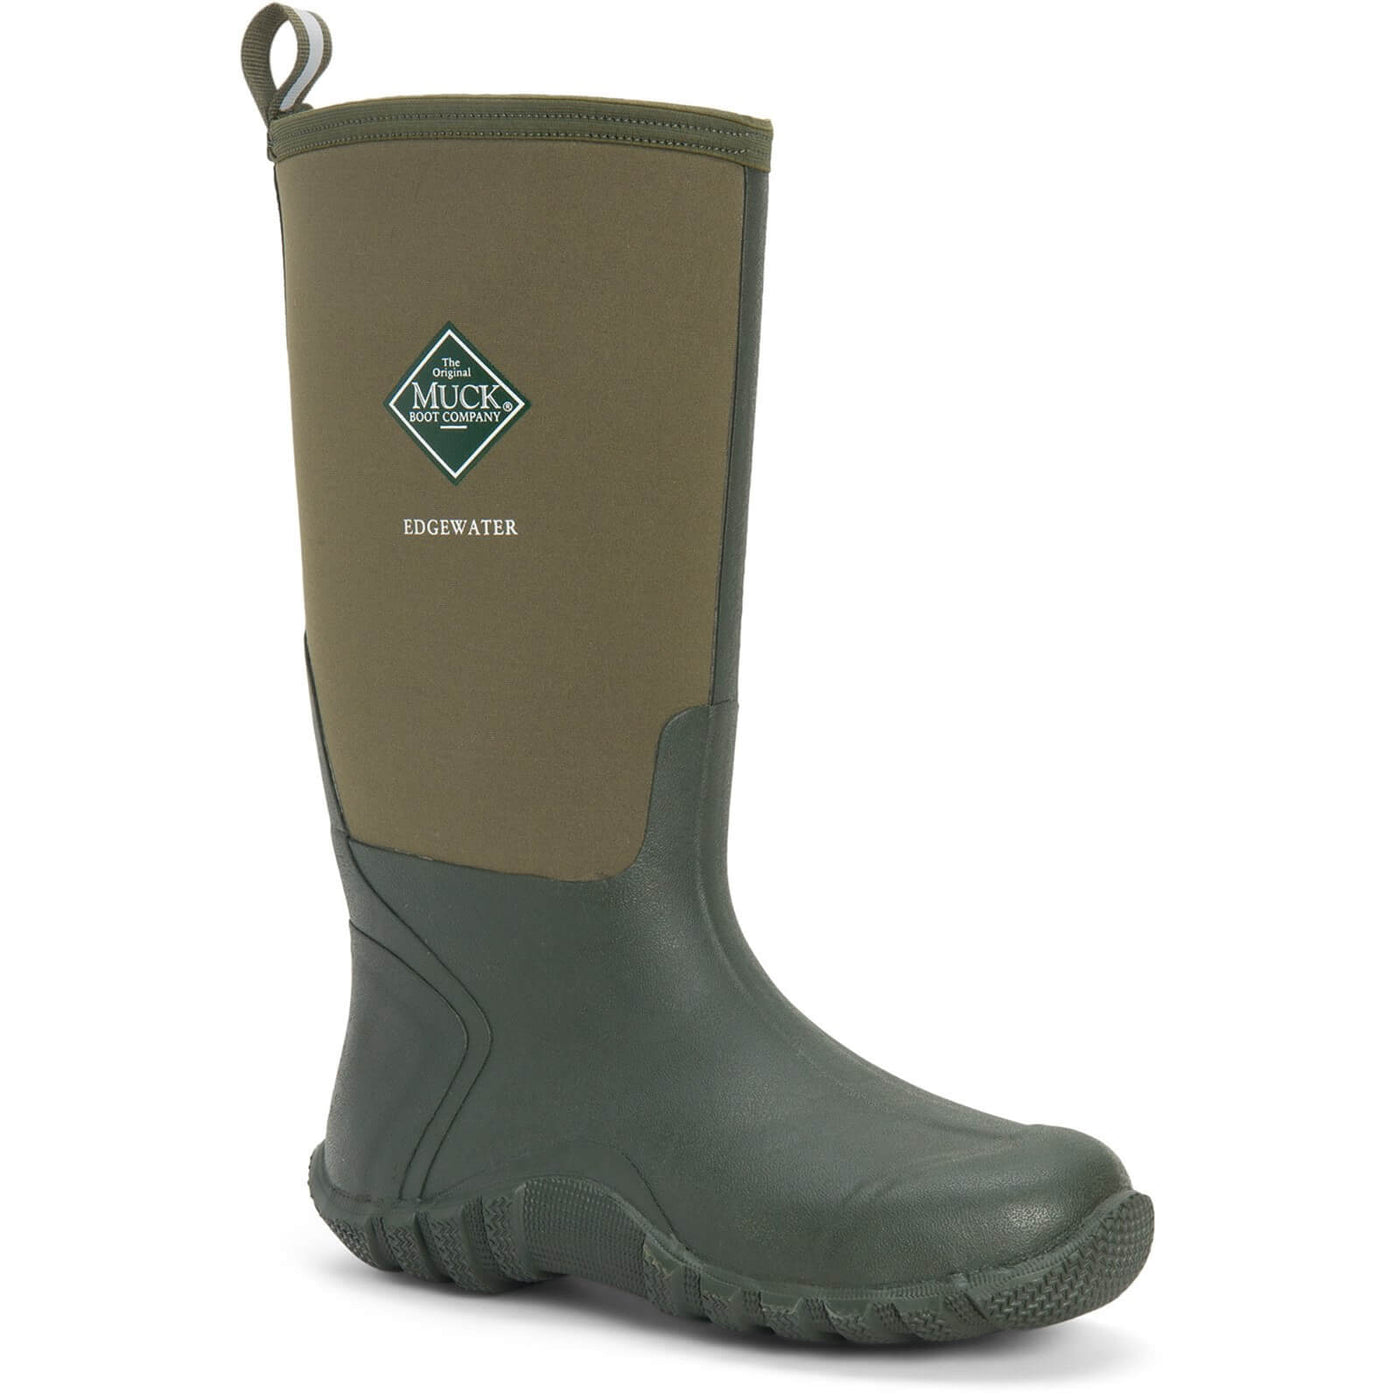 Muck Boots Edgewater Hi Patterned Wellies Moss 1#colour_moss